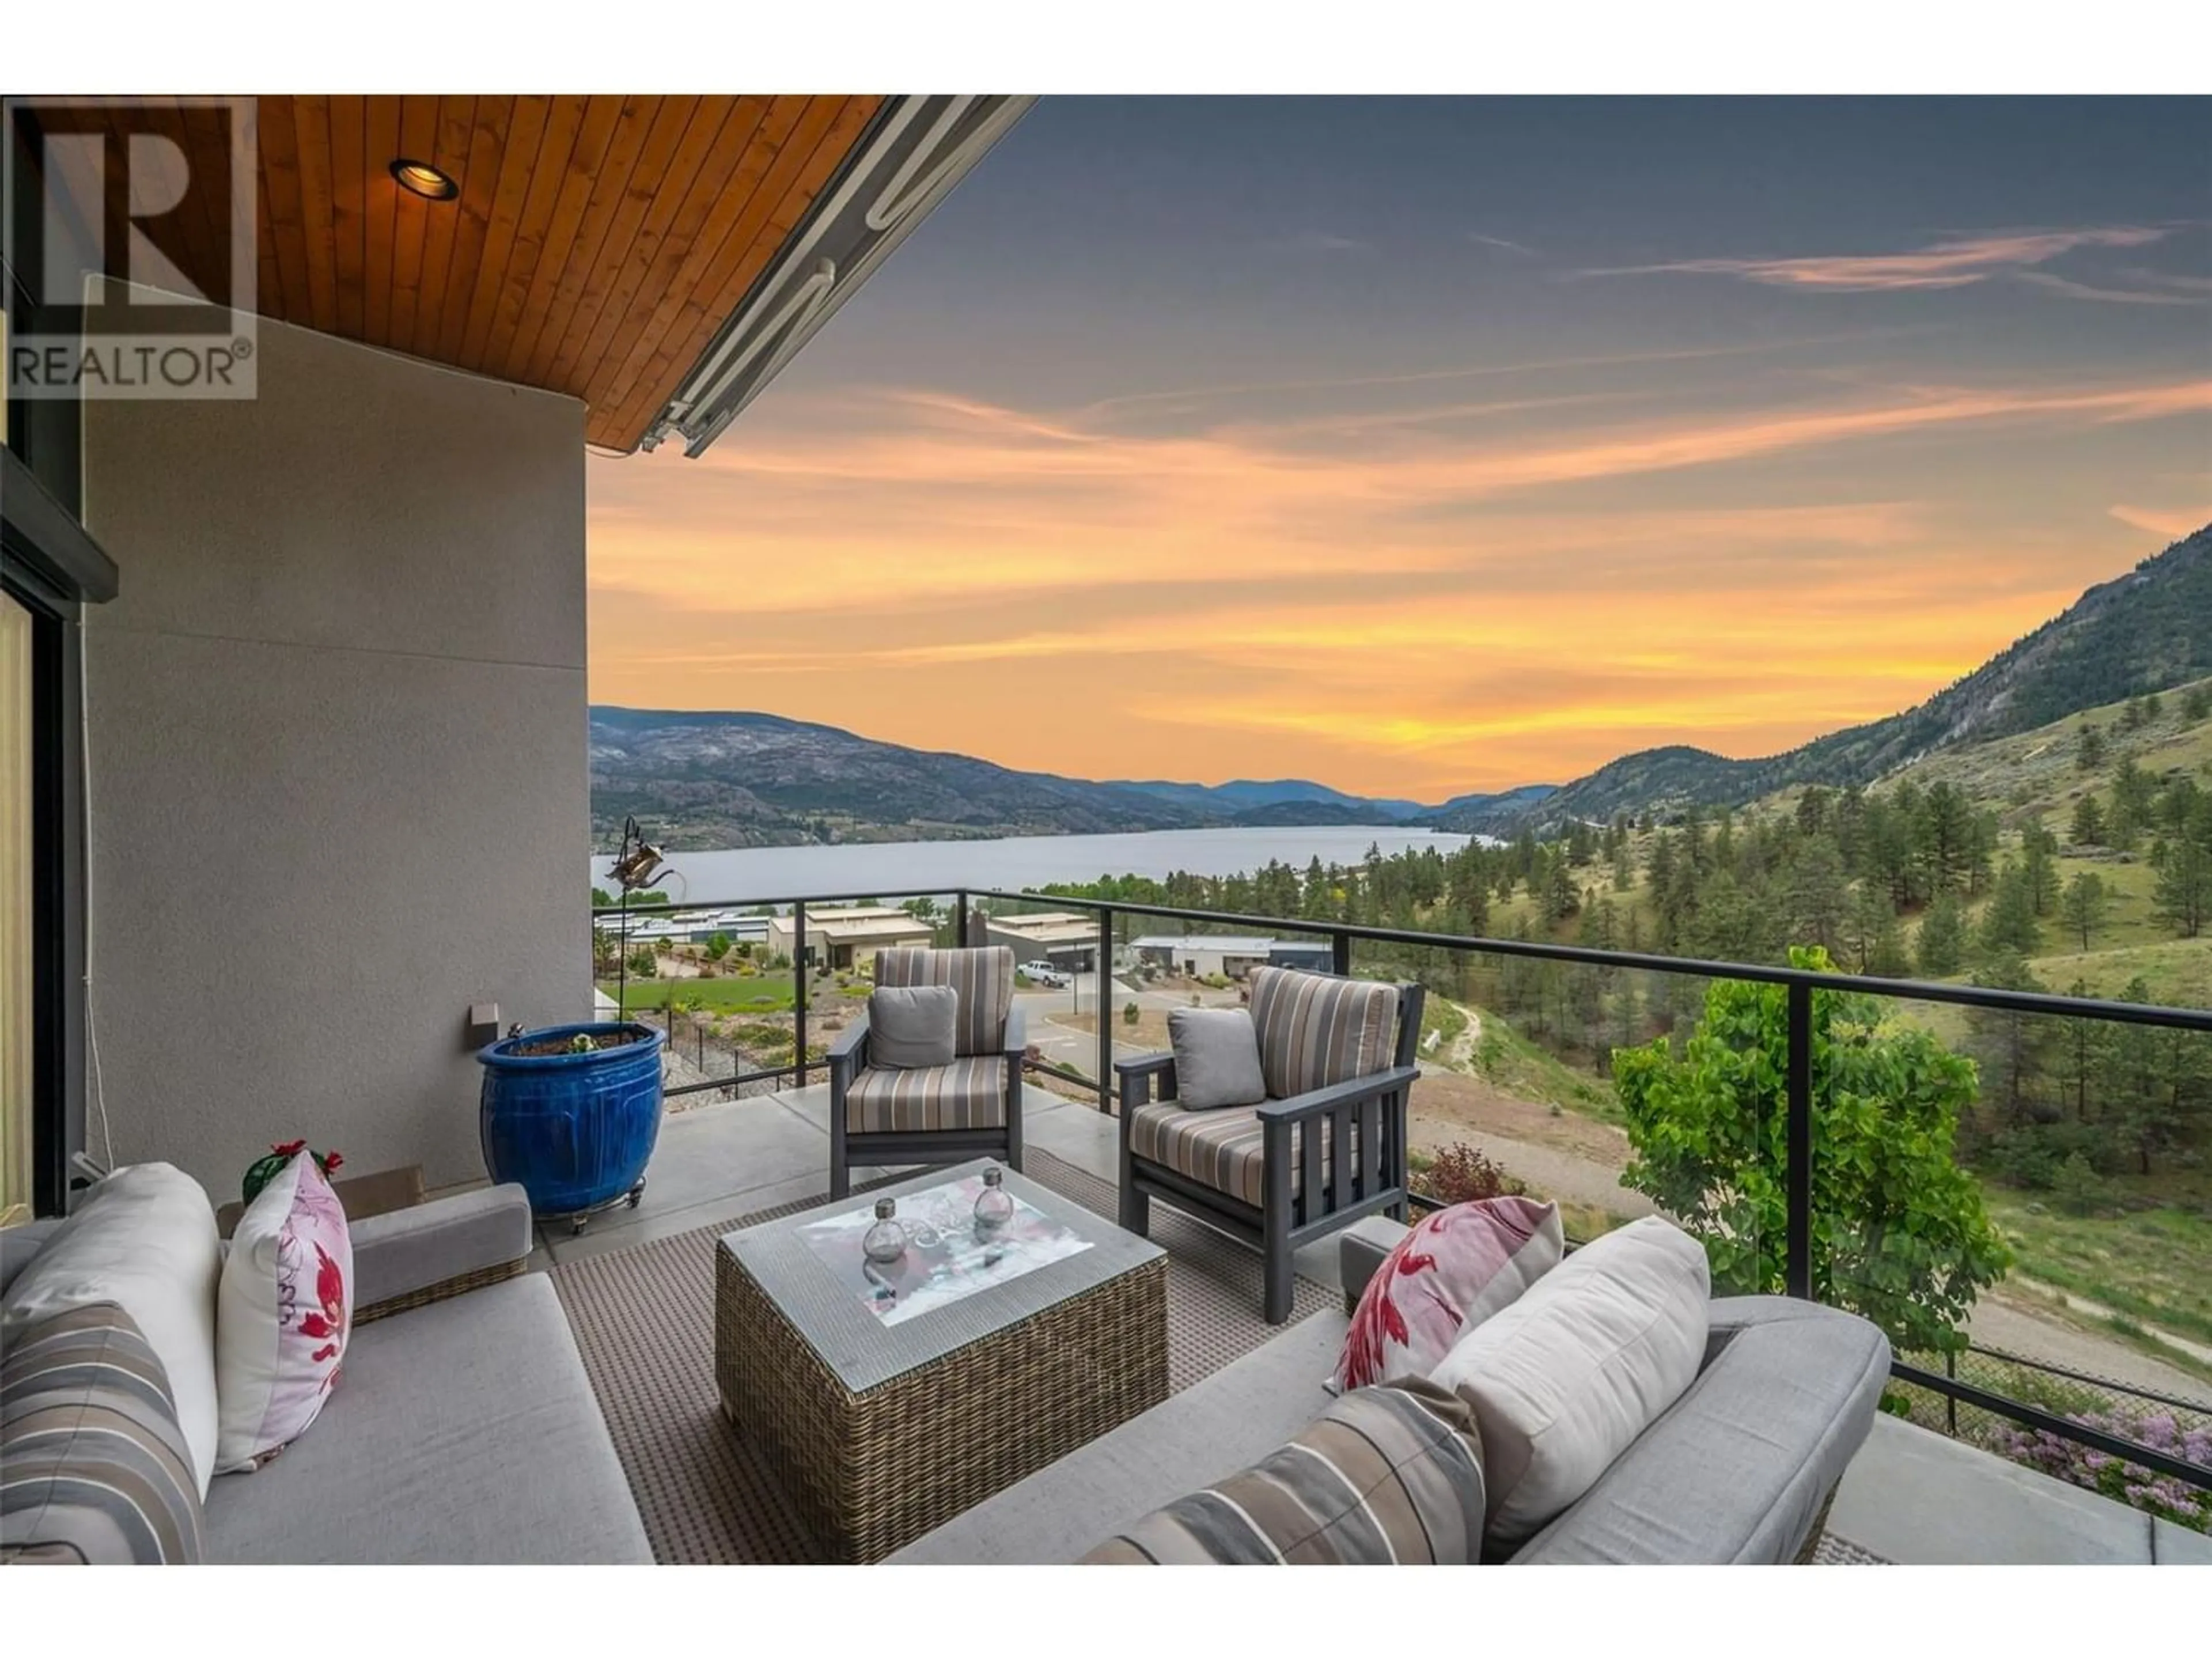 Lakeview for 115 Ridge View, Penticton British Columbia V2A0B1